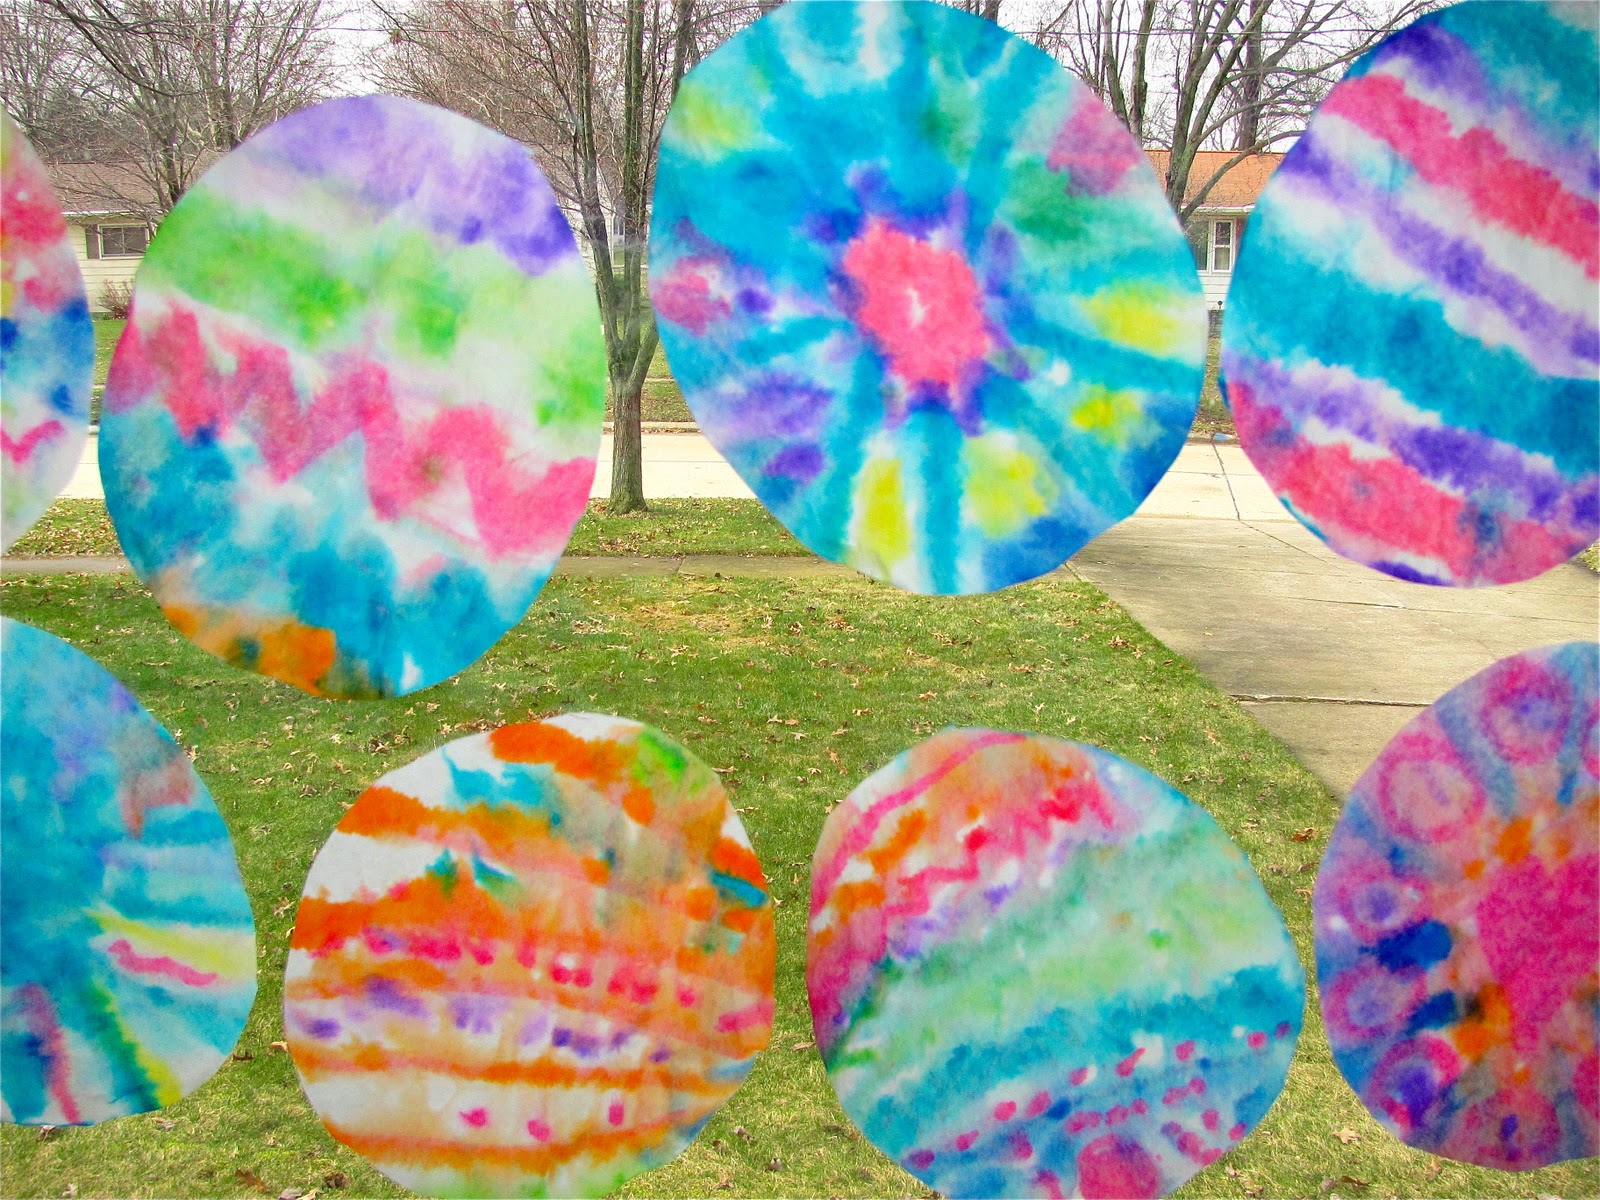 How To Draw Tie Dye With Water-Based Markers